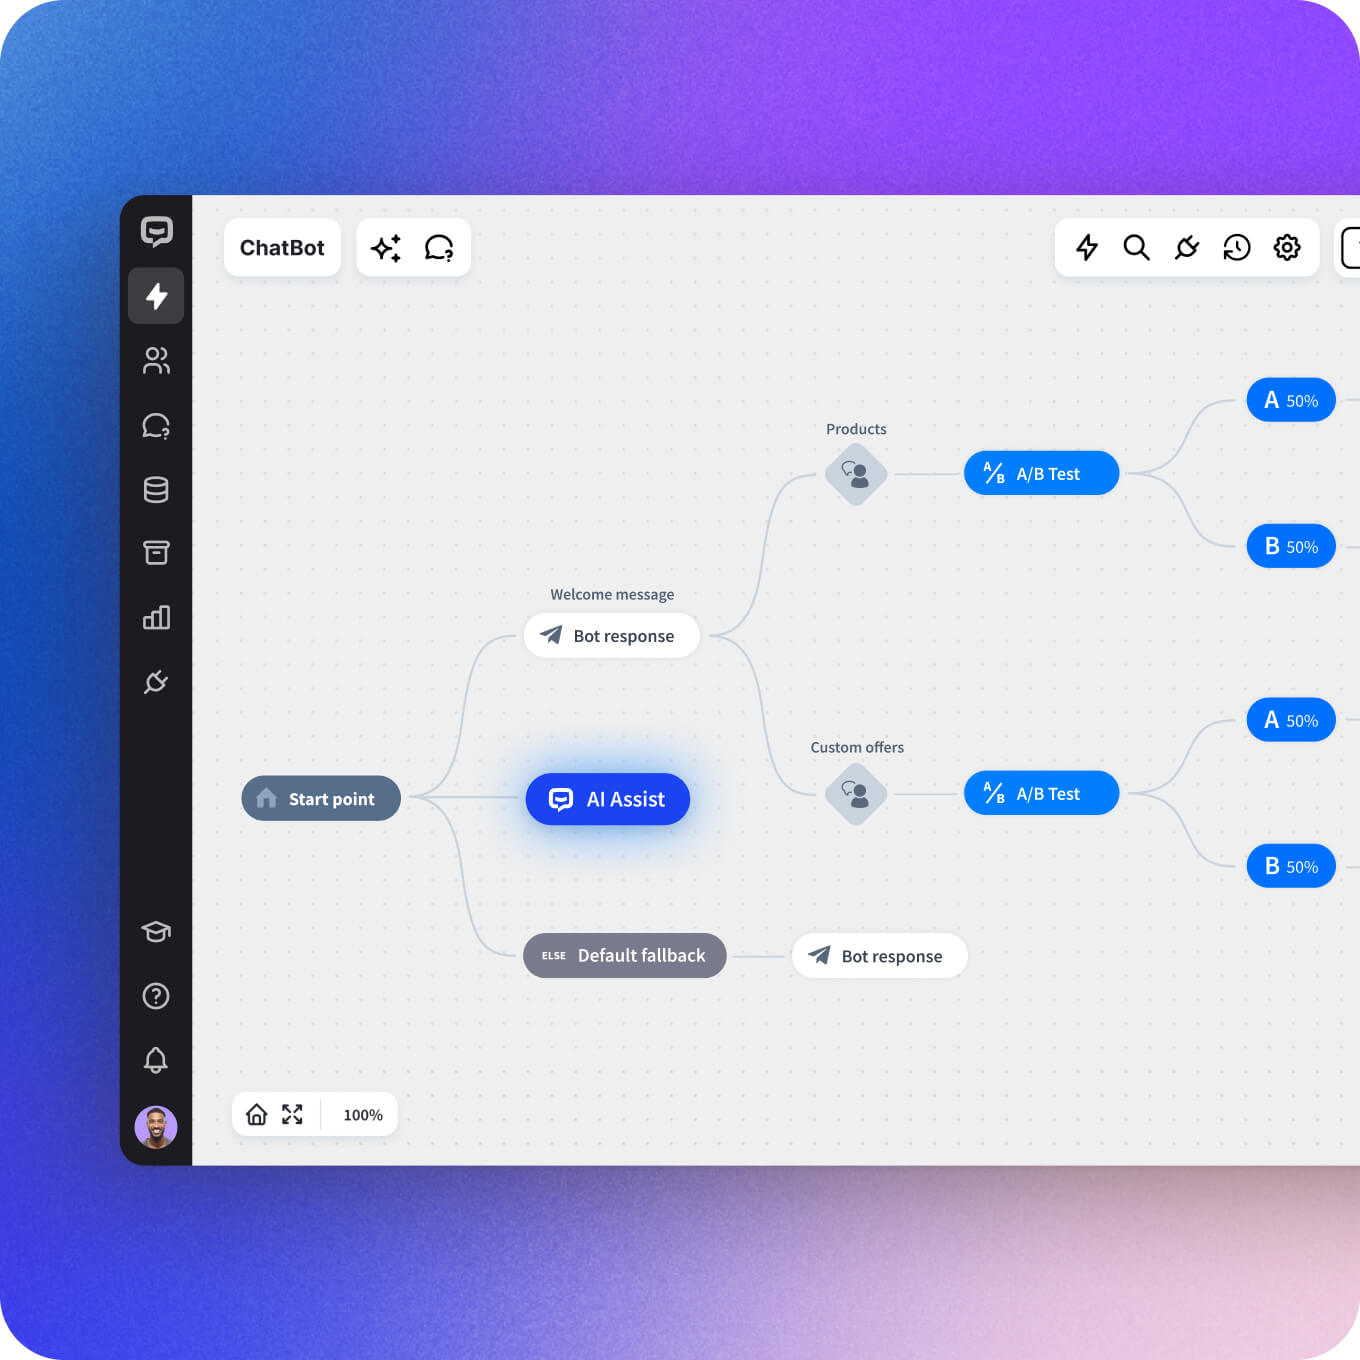 Interface of a ChatBot application displaying a custom chatbot flow created using ChatBot's Visual Builder.